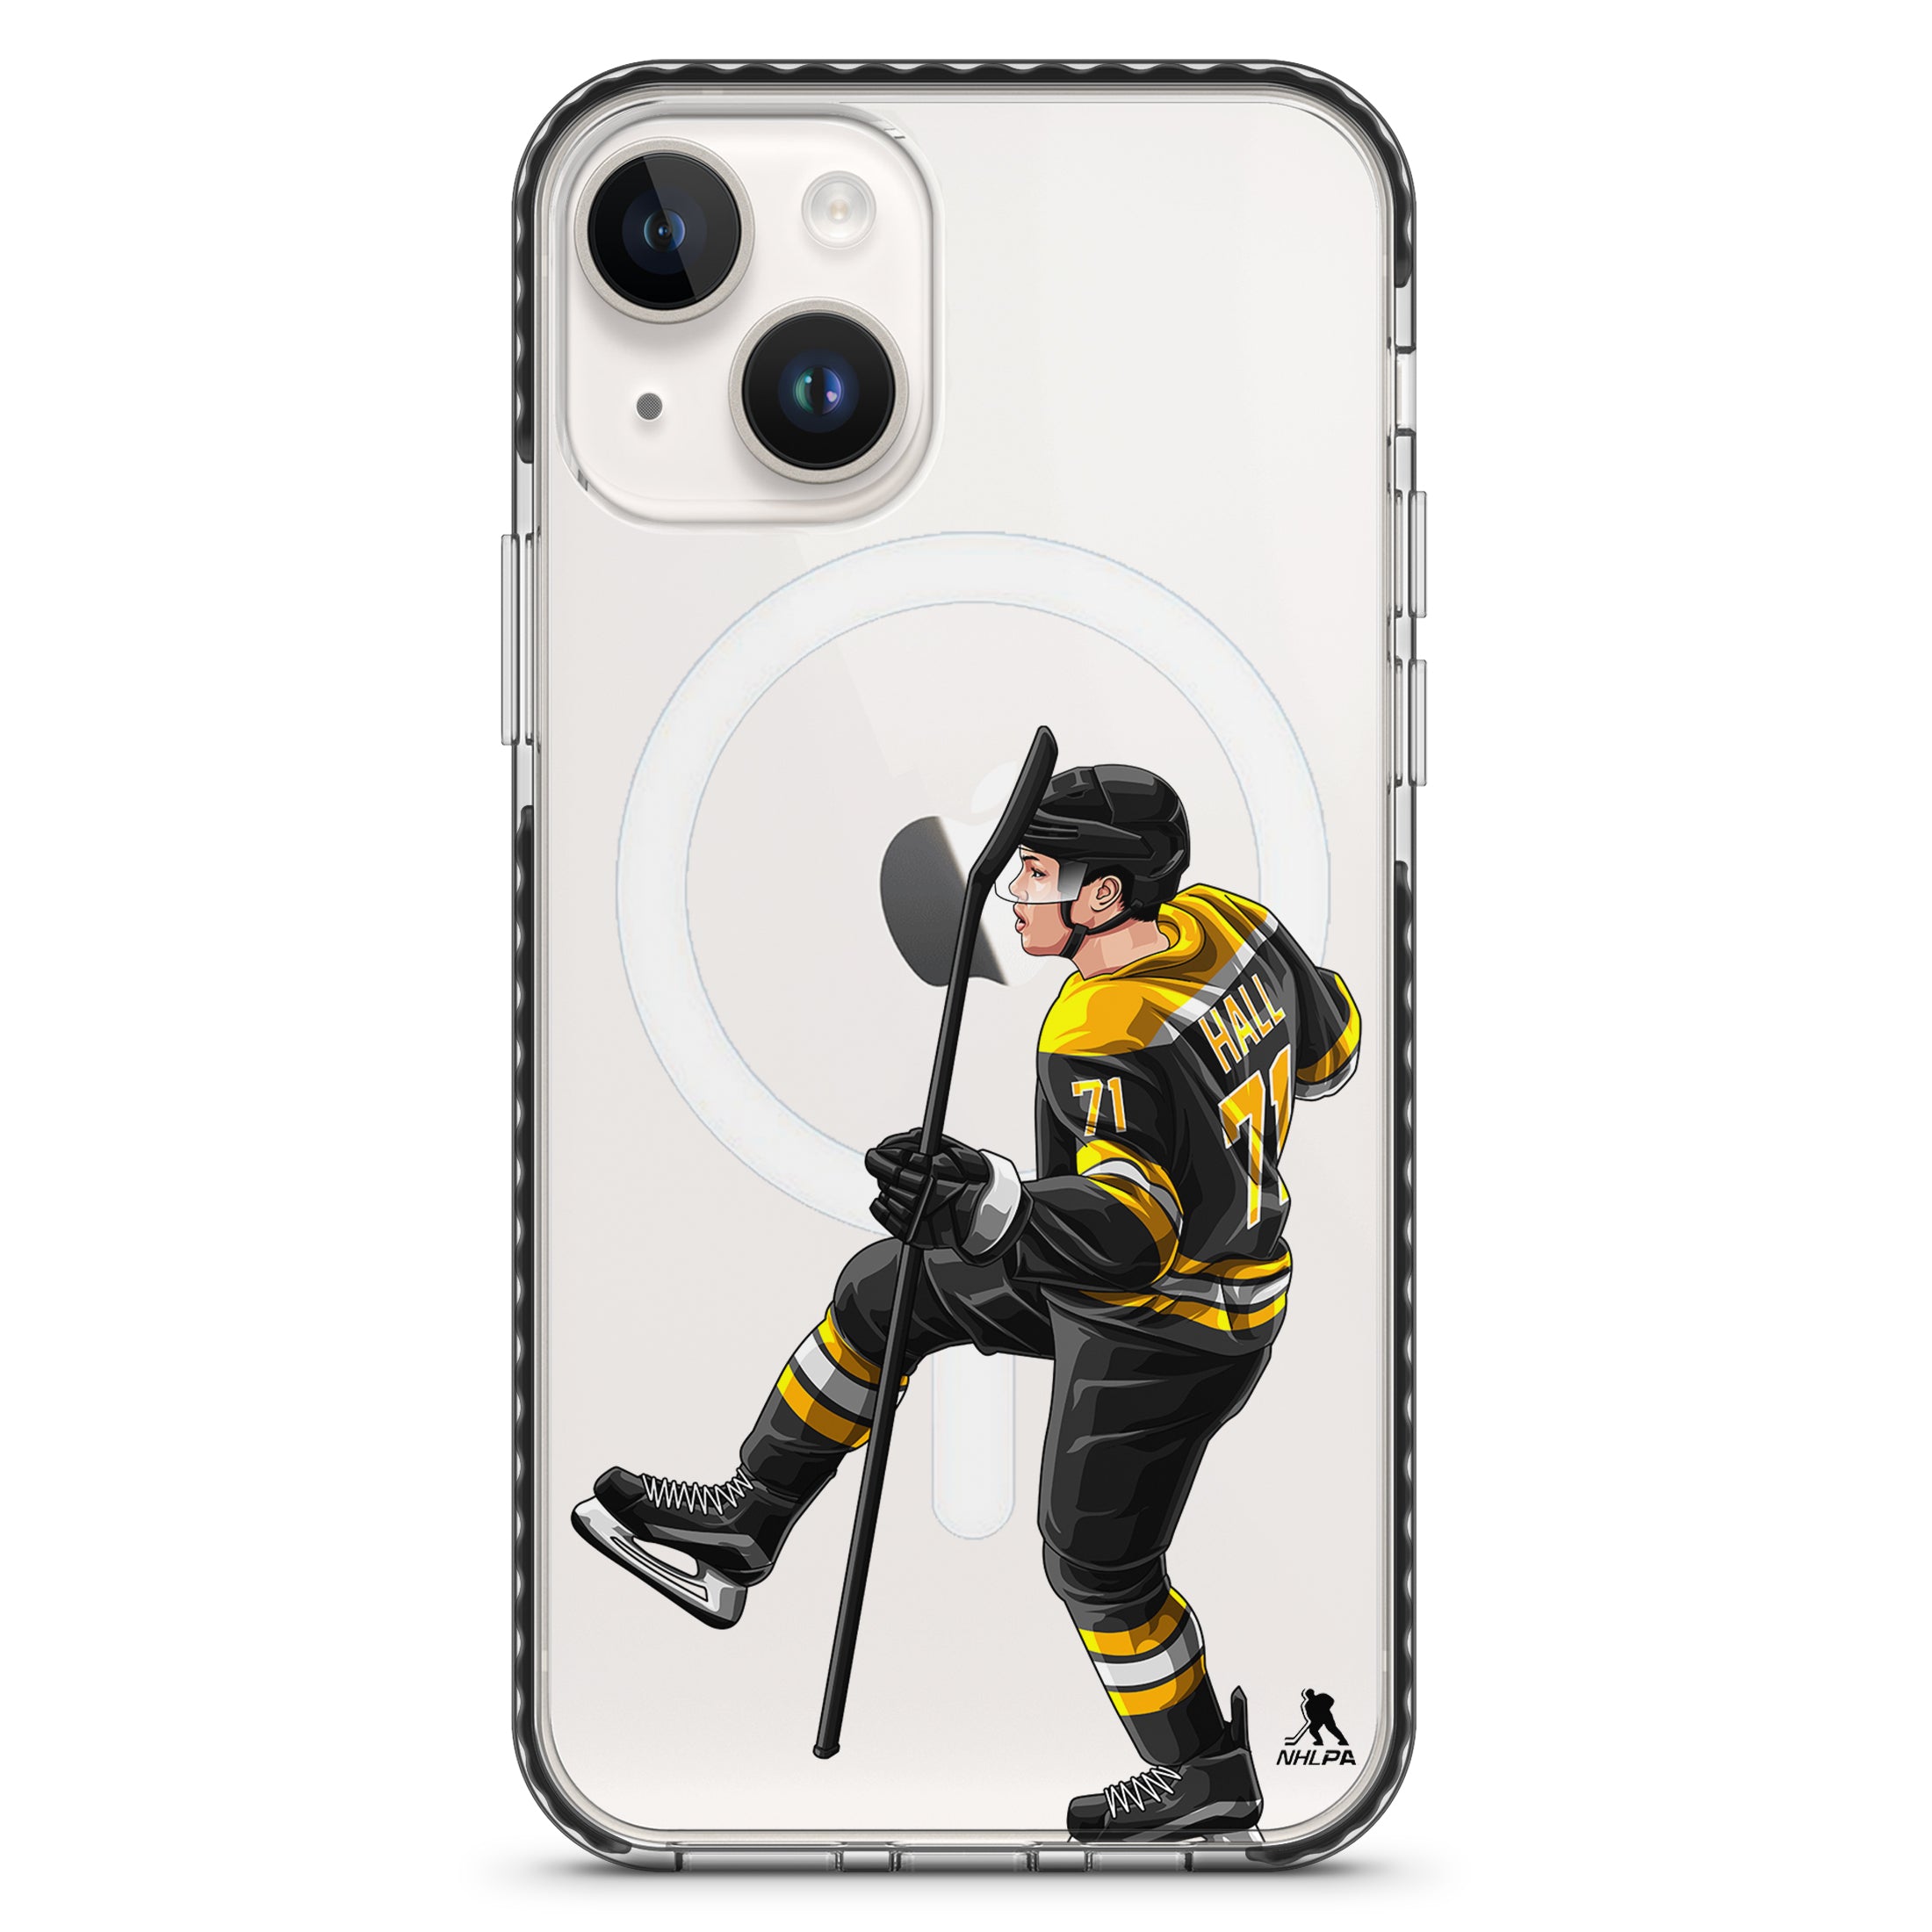 Hall Clear Series 2.0 Phone Case